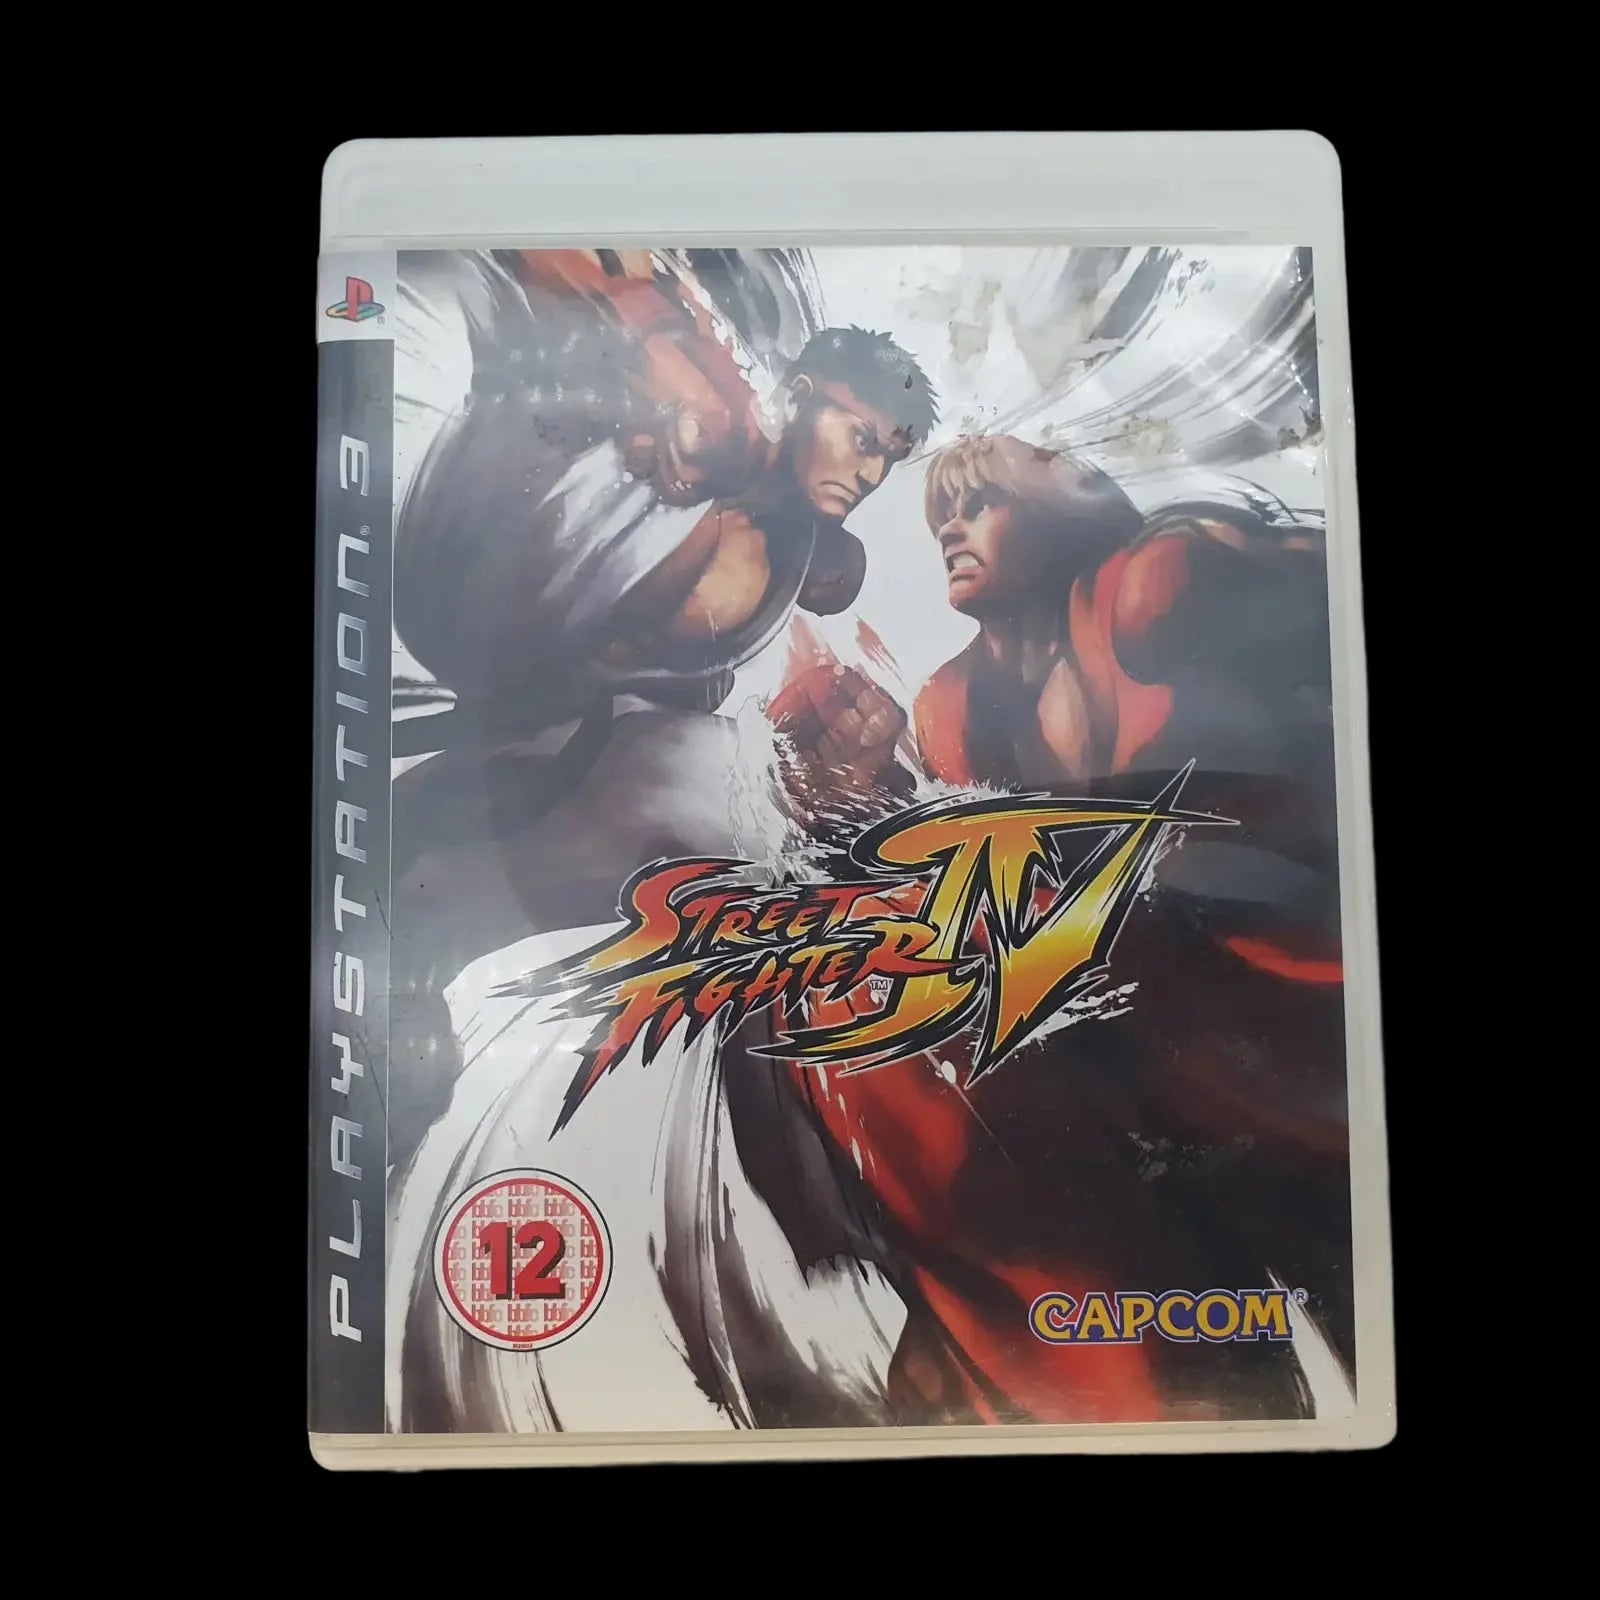 Street Fighter Iv Sony Playstation 3 Capcom 2009 Video Game